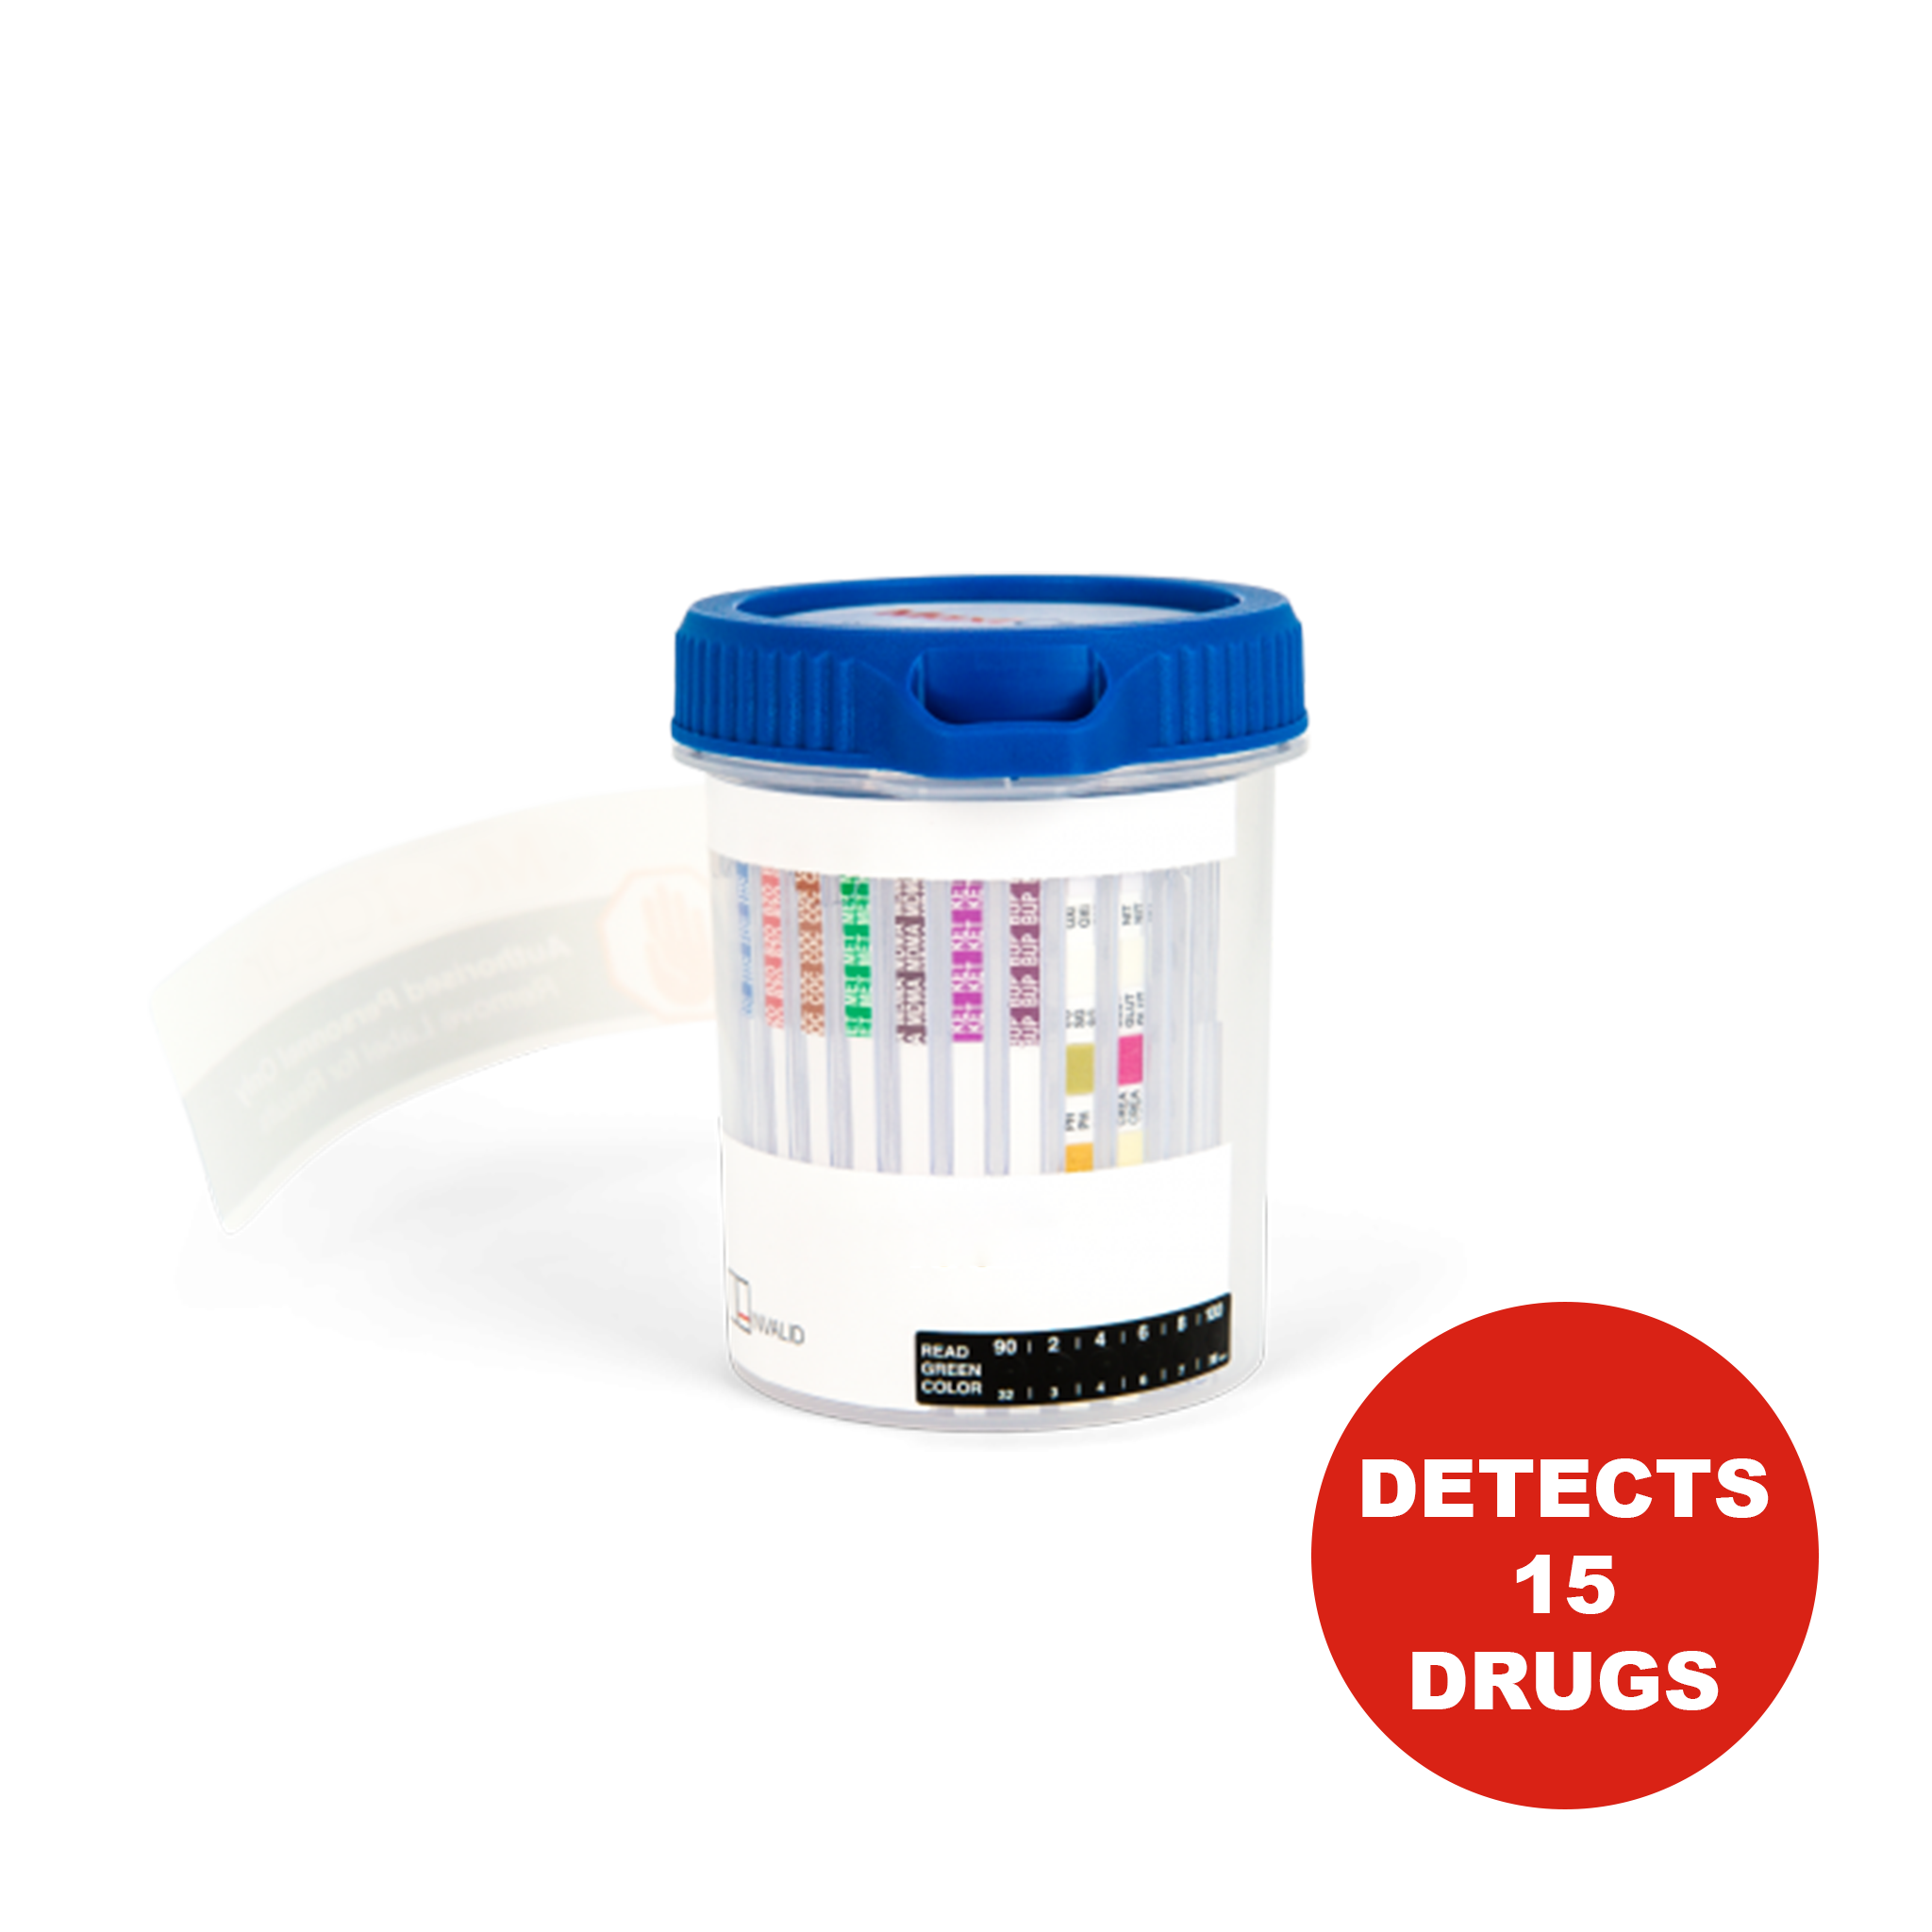 Maxi Clear | Urine Drug Test Cup | Detects up to 15 Drugs (1 Test)